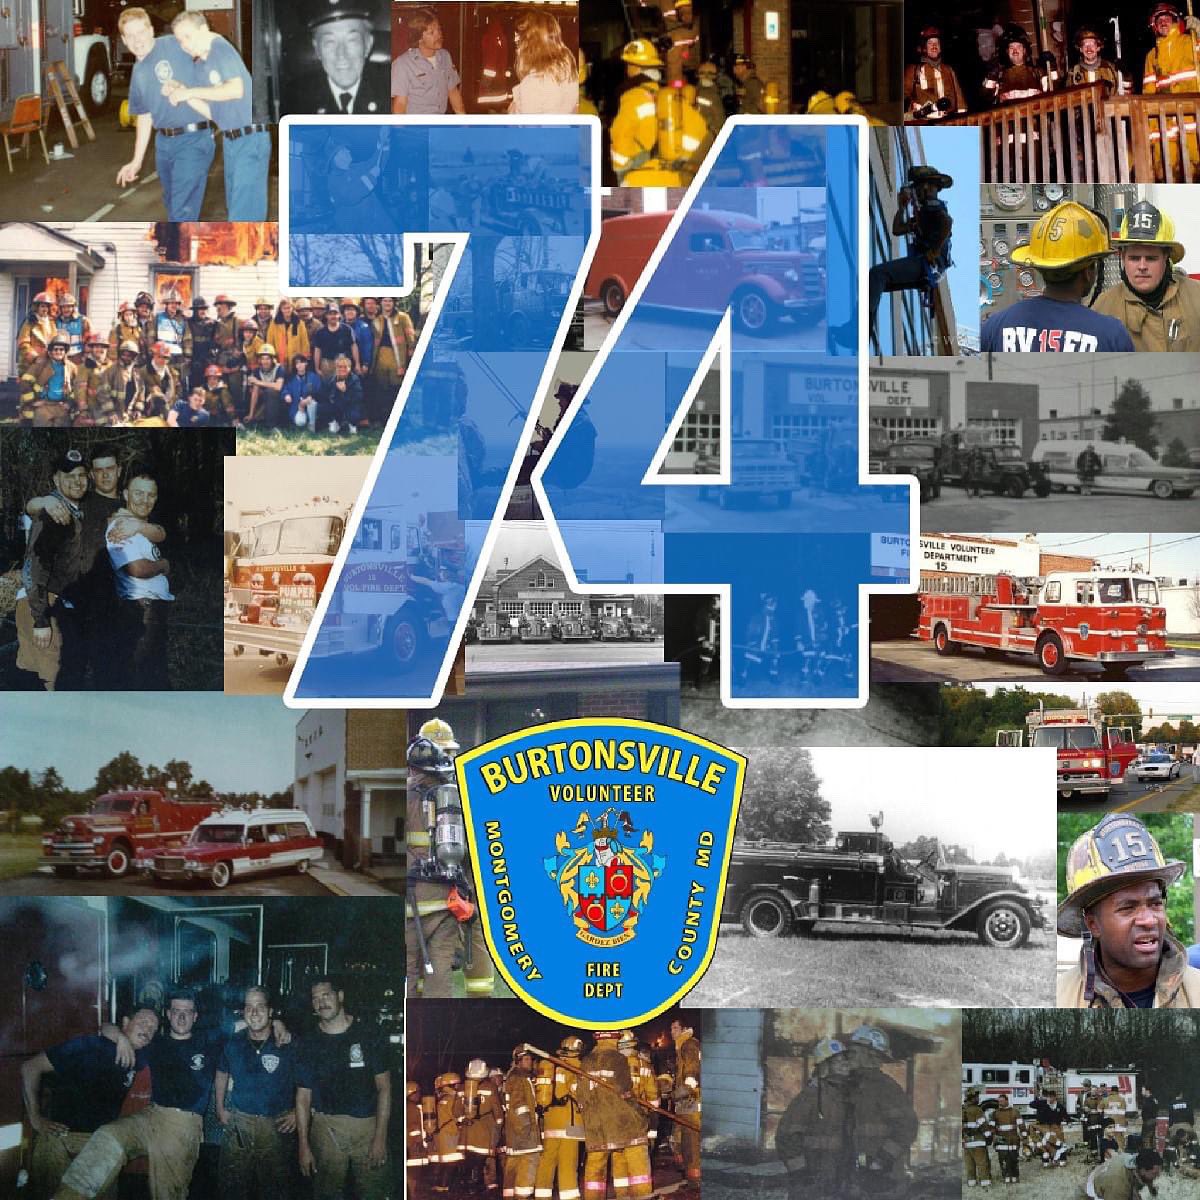 We don’t have a BVFD $CashApp to drop, but if you would like to do something special for @BVFD15 as we celebrate the 74th Anniversary- volunteering as a Firefighter, EMT or Auxiliary member works for us!!!! #JoinBVFD 

#VolunteerWithPurpose
#BVFD
#R15EUp
#StepUpAndStandOut